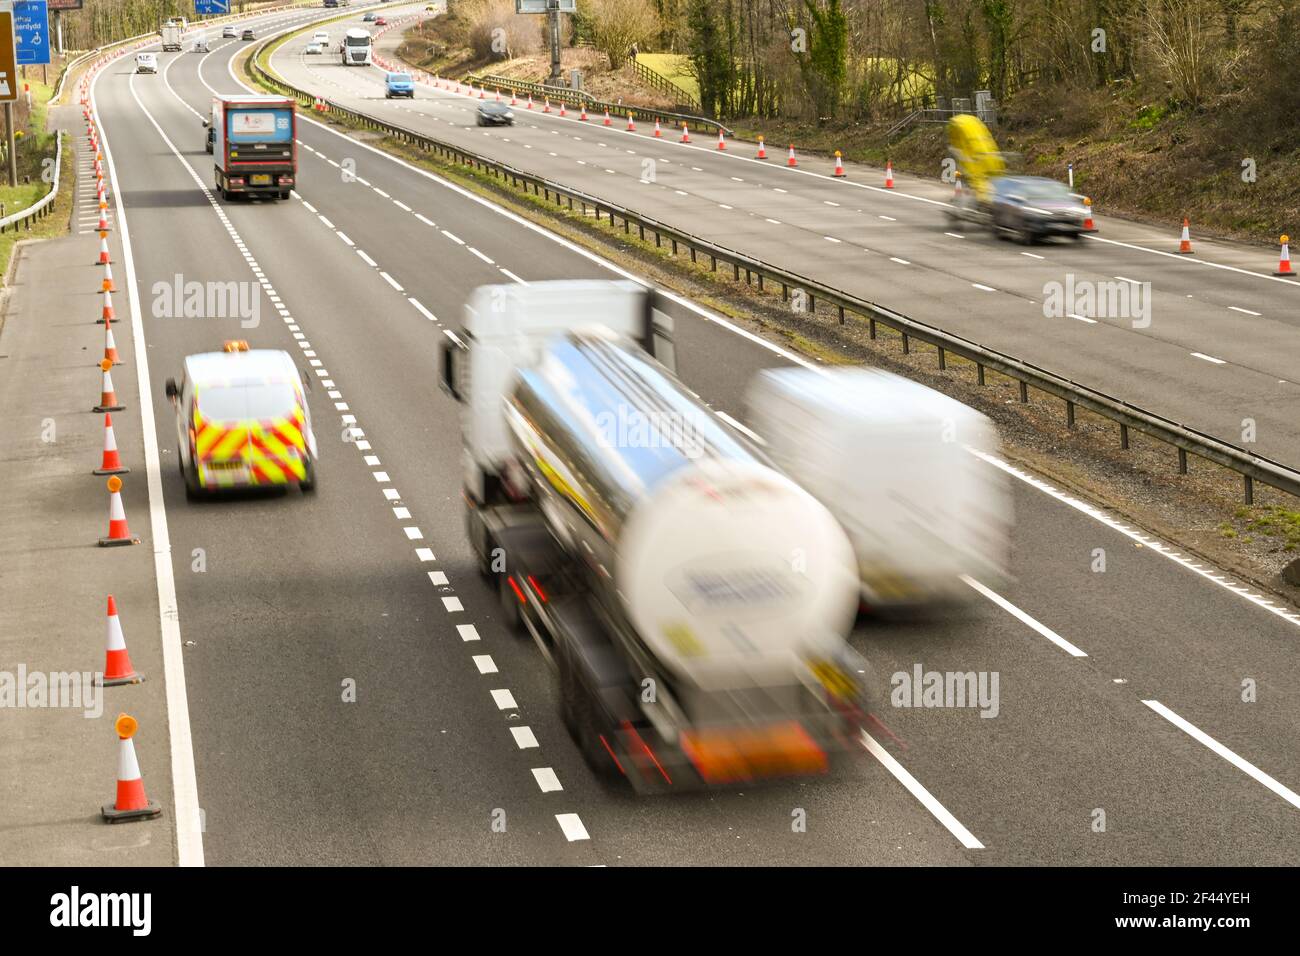 Miskin, Cardiff, Wales - March 2021: Traffic on the M4 motorway near Cardiff. Slow shutter speed used to blur the motion of vehicles to convey speed Stock Photo